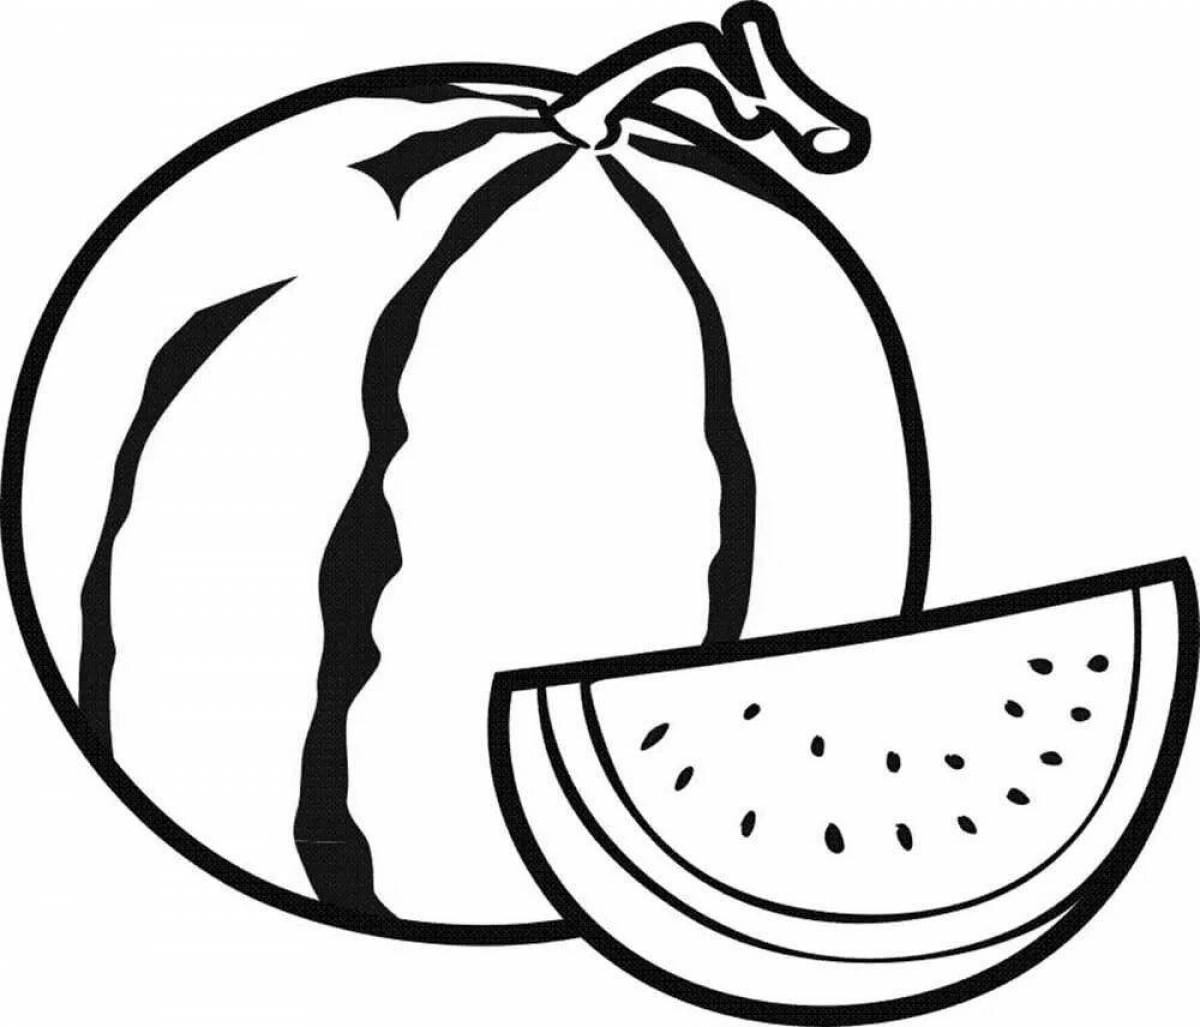 Amazing watermelon coloring page for little ones